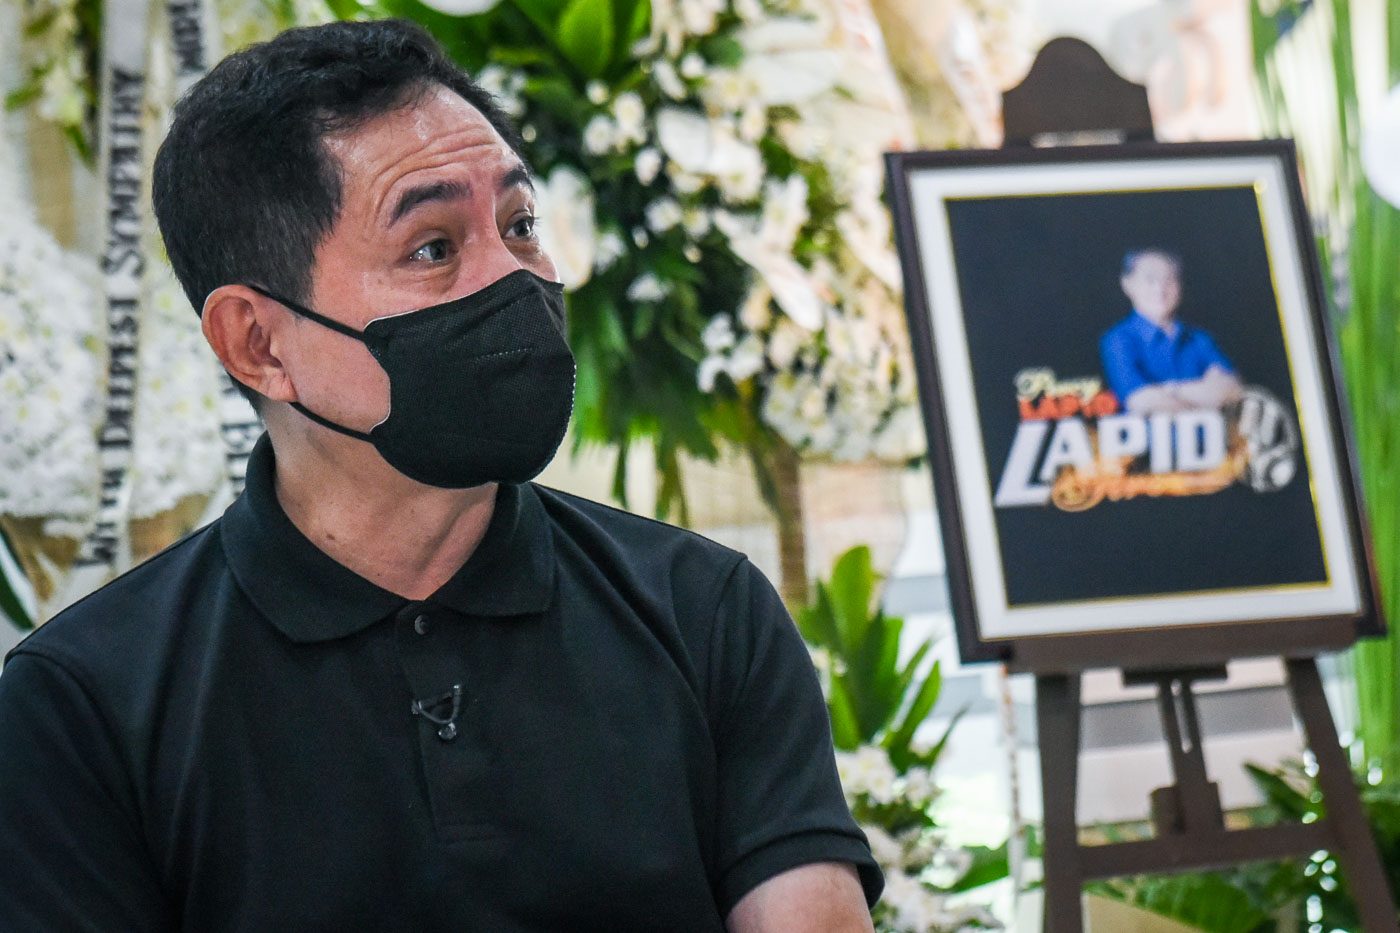 WATCH: Percy Lapid’s brother says being critical is media’s role